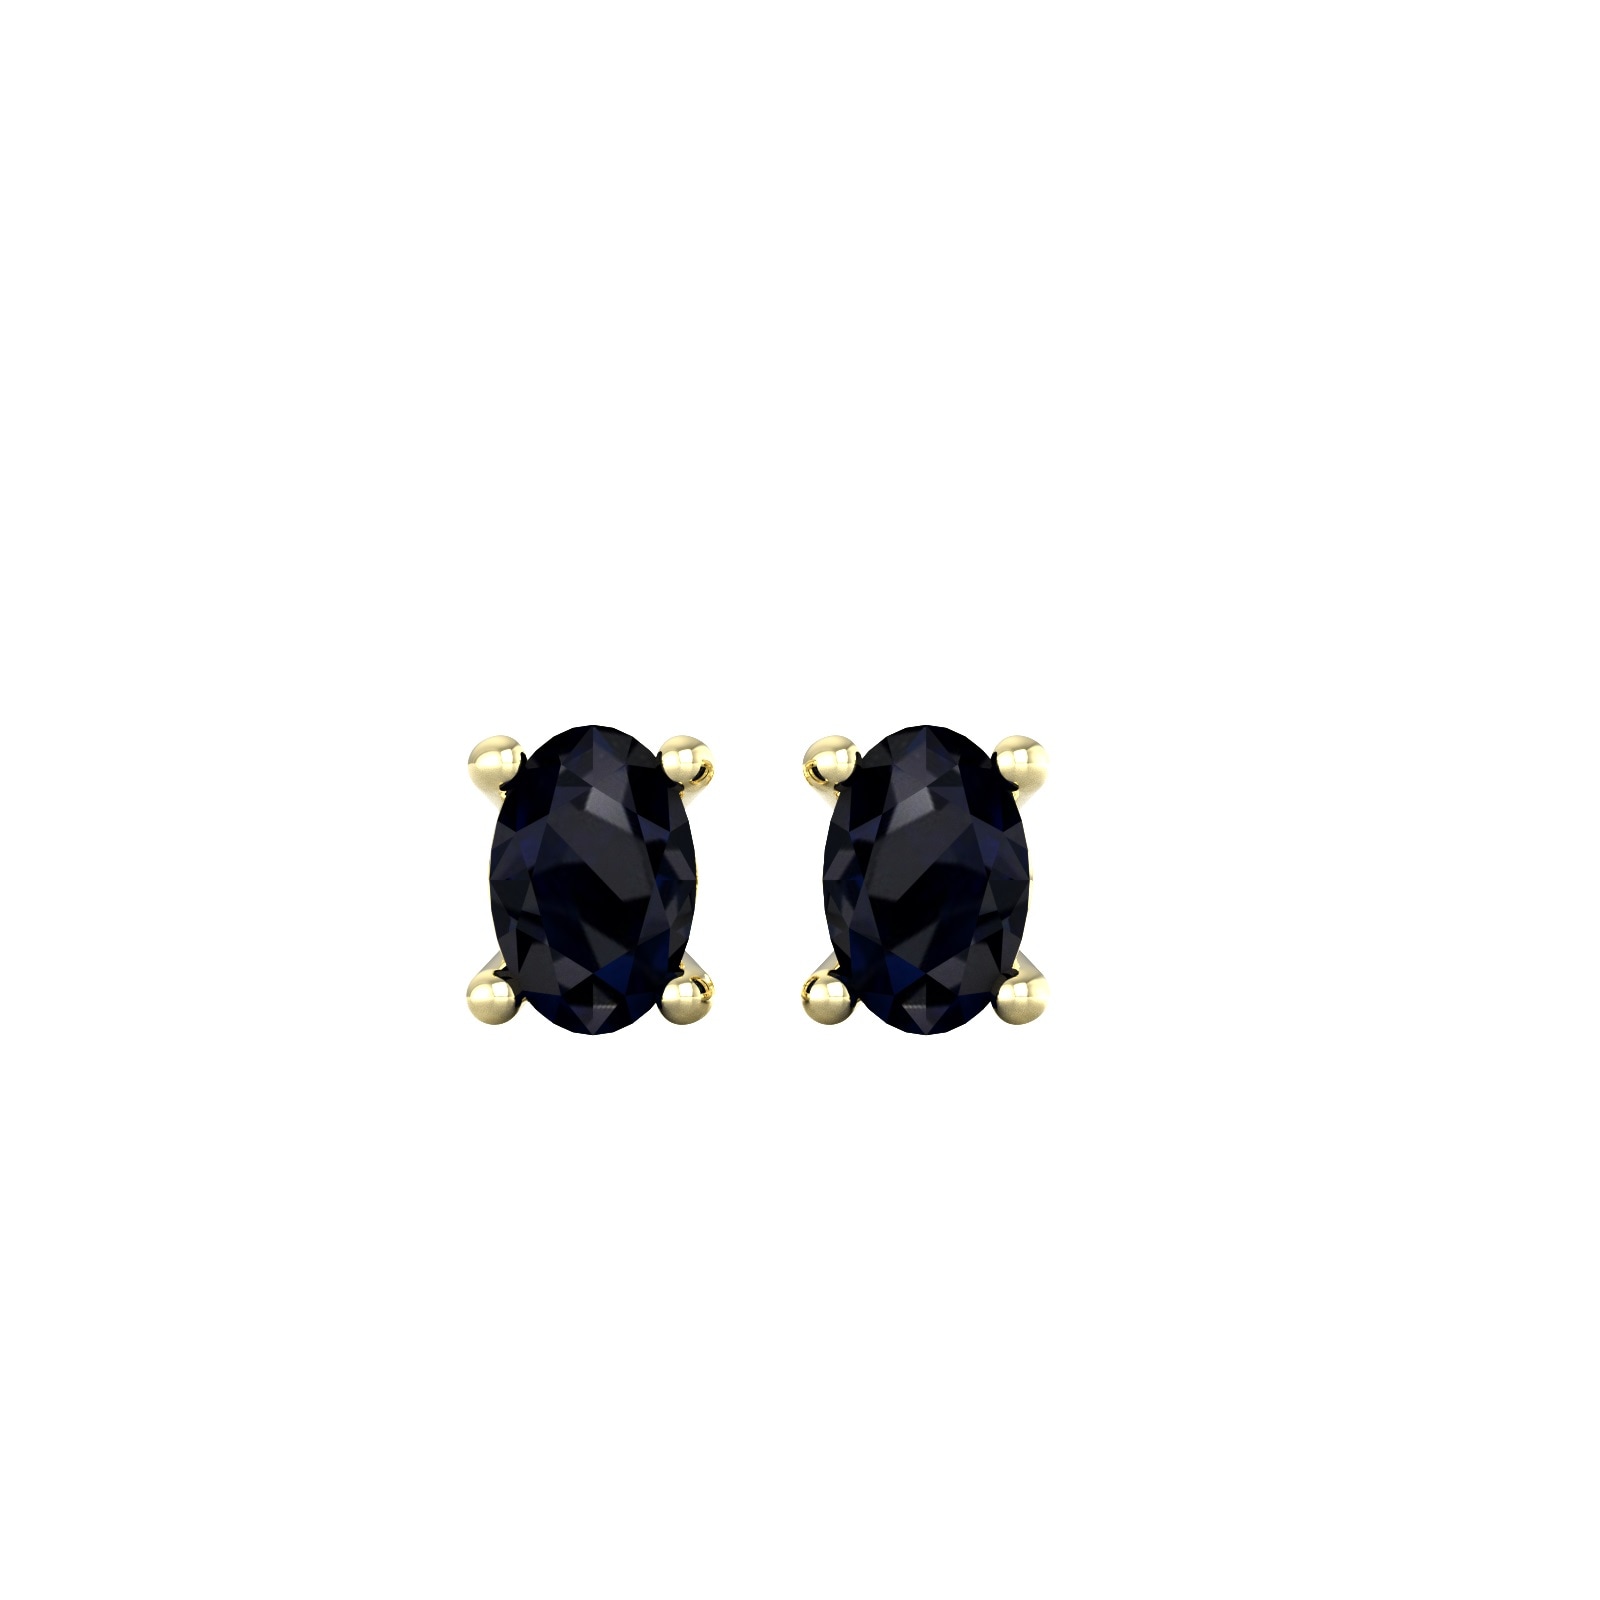 9ct yellow gold 4 claw oval cut sapphire stud earrings